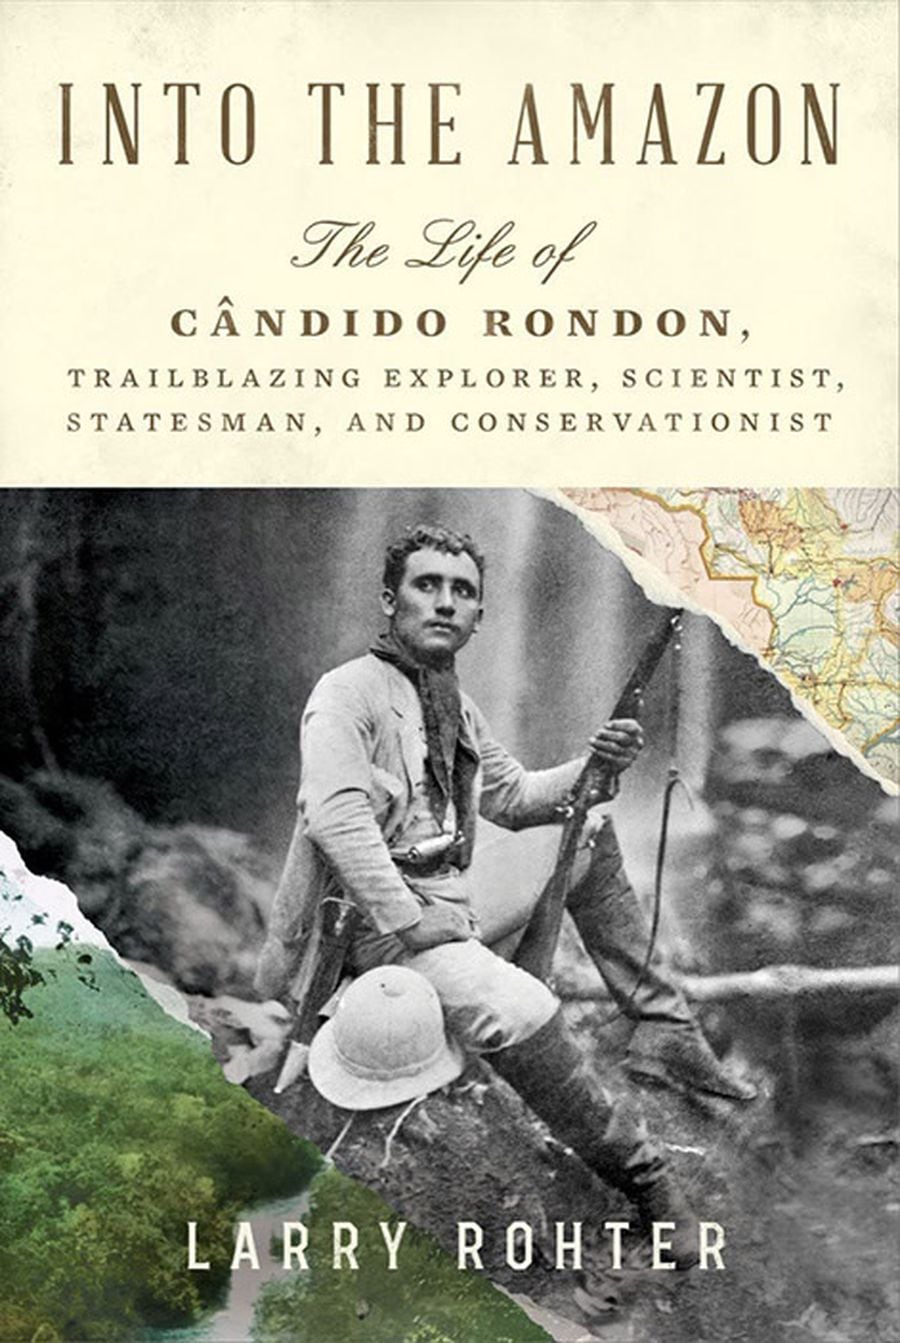 Into the Amazon: The Life of Candido Rondon, Trailblazing Explorer, Scientist, Statesman, and Conservationist